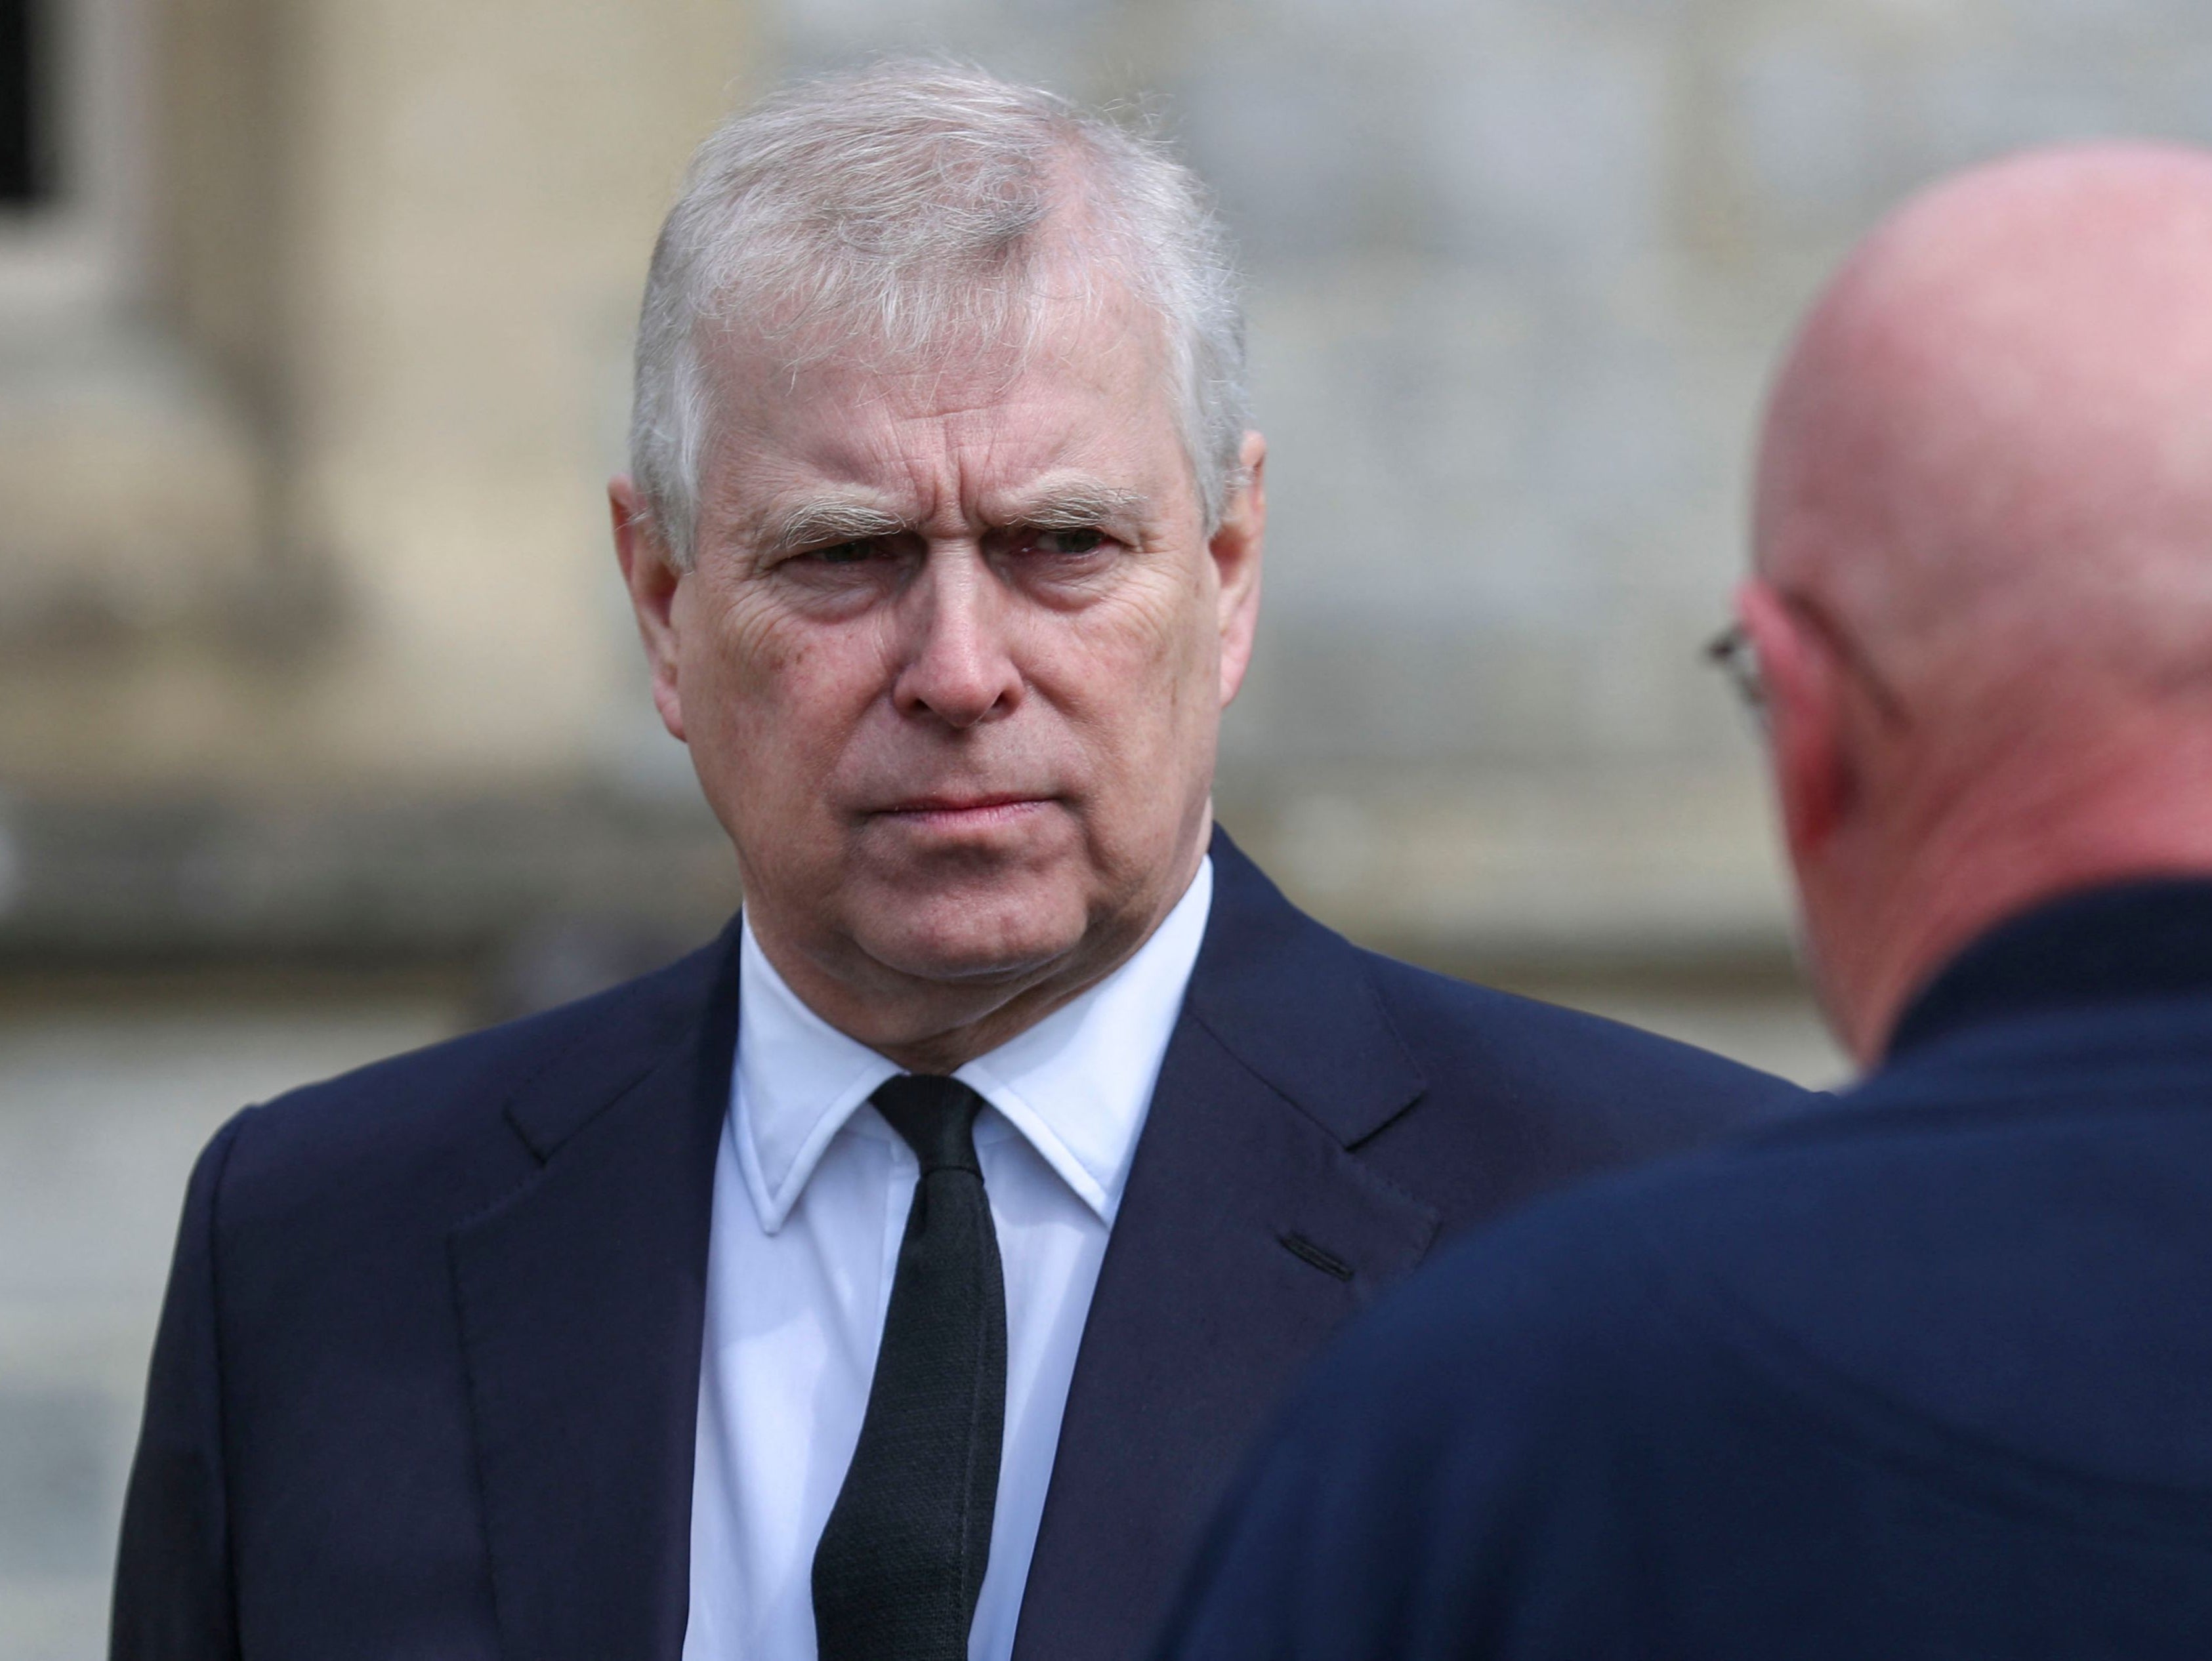 Prince Andrew is reportedly attempting to rush through the sale of his £17m Swiss chalet as the bills mount in his legal battle against Virginia Giuffre